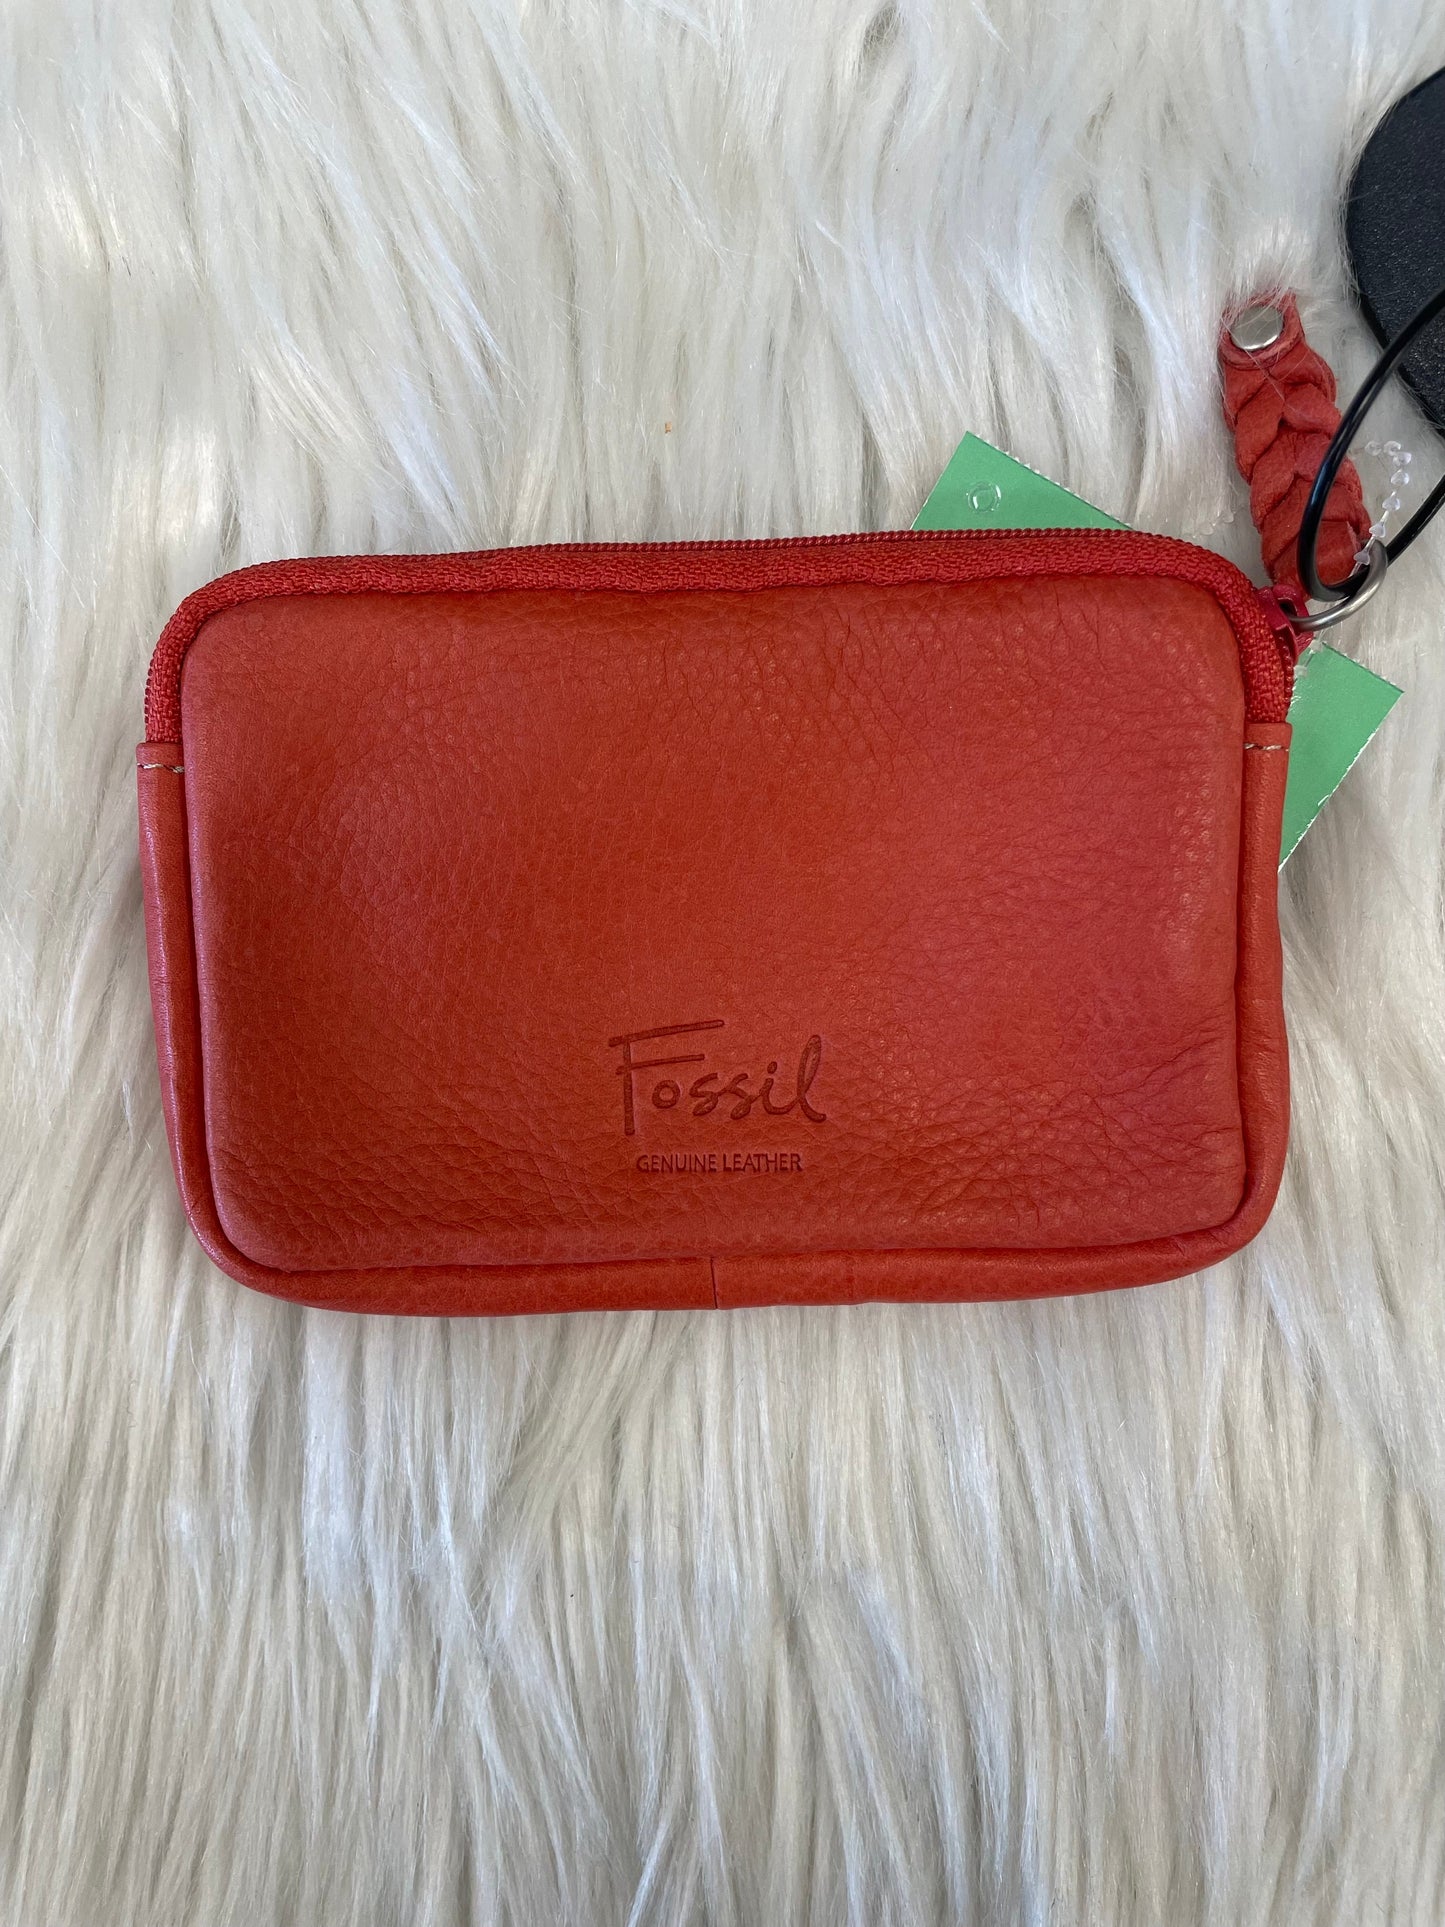 Coin Purse Leather By Fossil  Size: Medium